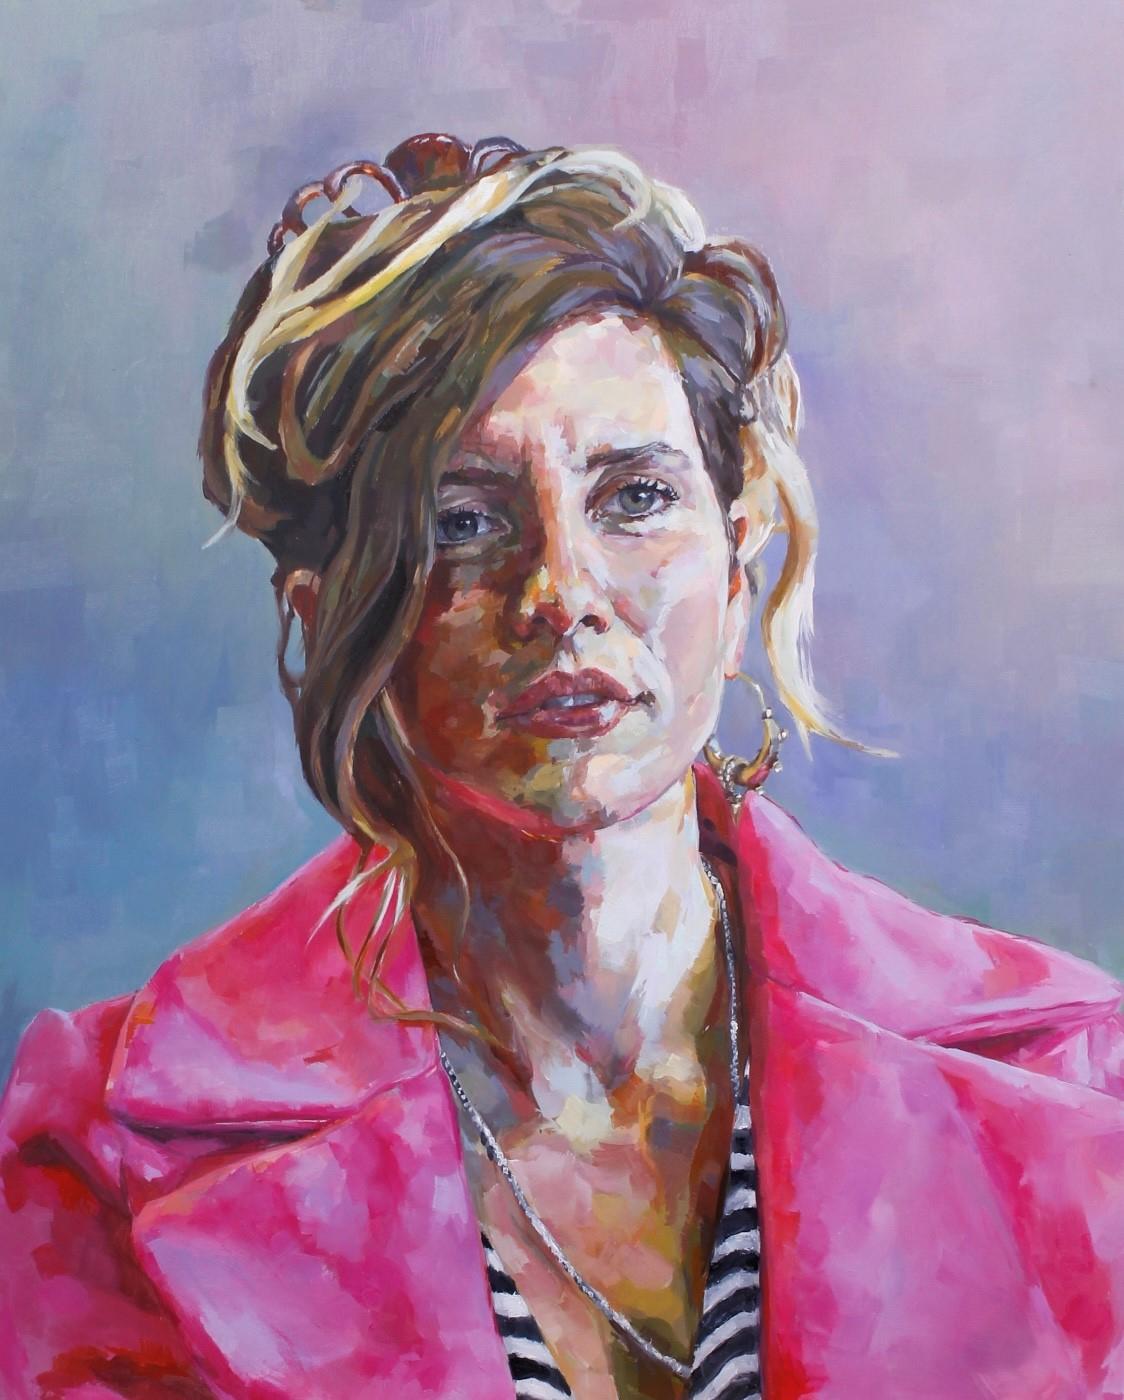 An oil painting of a woman with a bright pink coat, large earrings and her hair up, with a serious look on her face, looking into the distance 